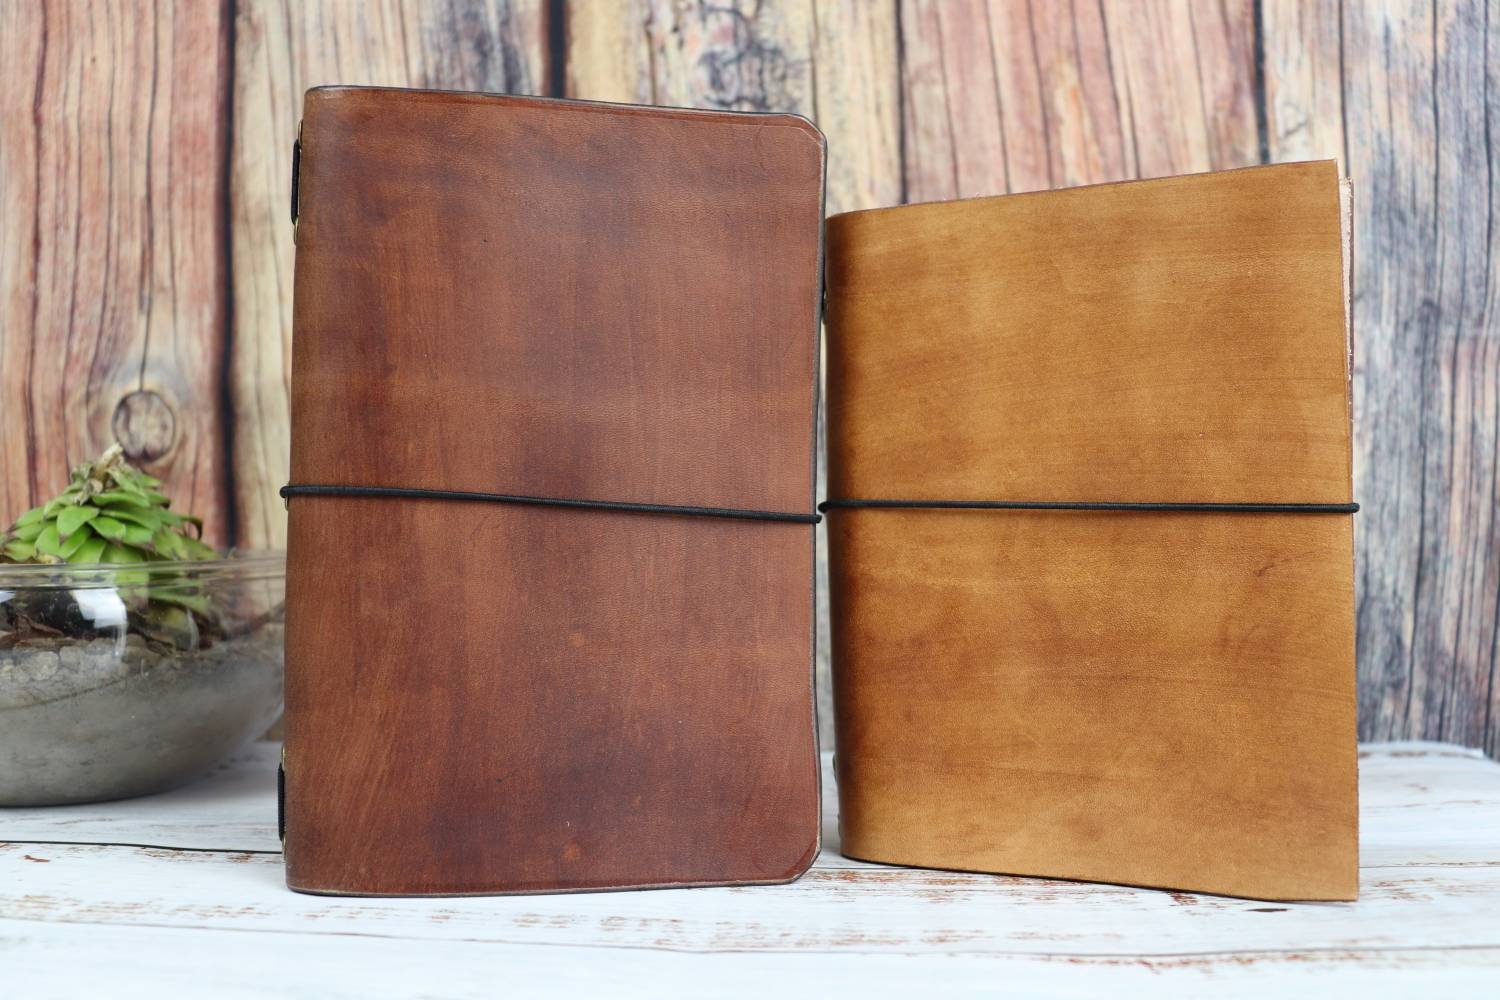 Refillable Leather Journal with Paper Refill Inserts, Fauxdori Midori Travelers Notebooks, Lined, Blank, Watercolor Mixed Media Booklets